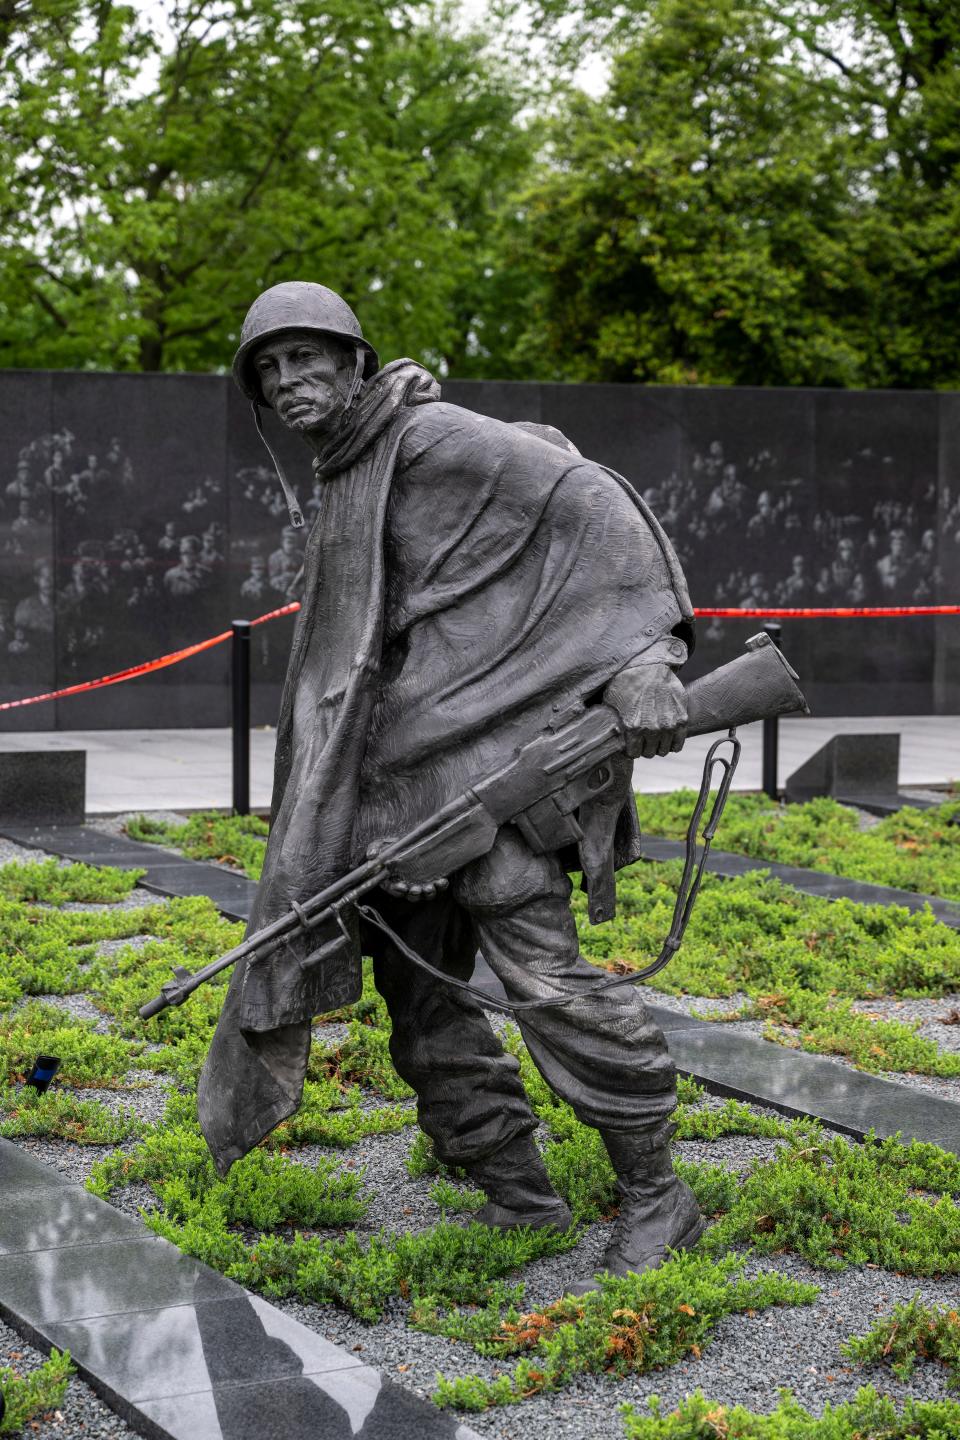 The Korean War Veterans Memorial in Washington, D.C., commemorates the sacrifices of the 5.8 million Americans who served in the armed services during the three-year war.